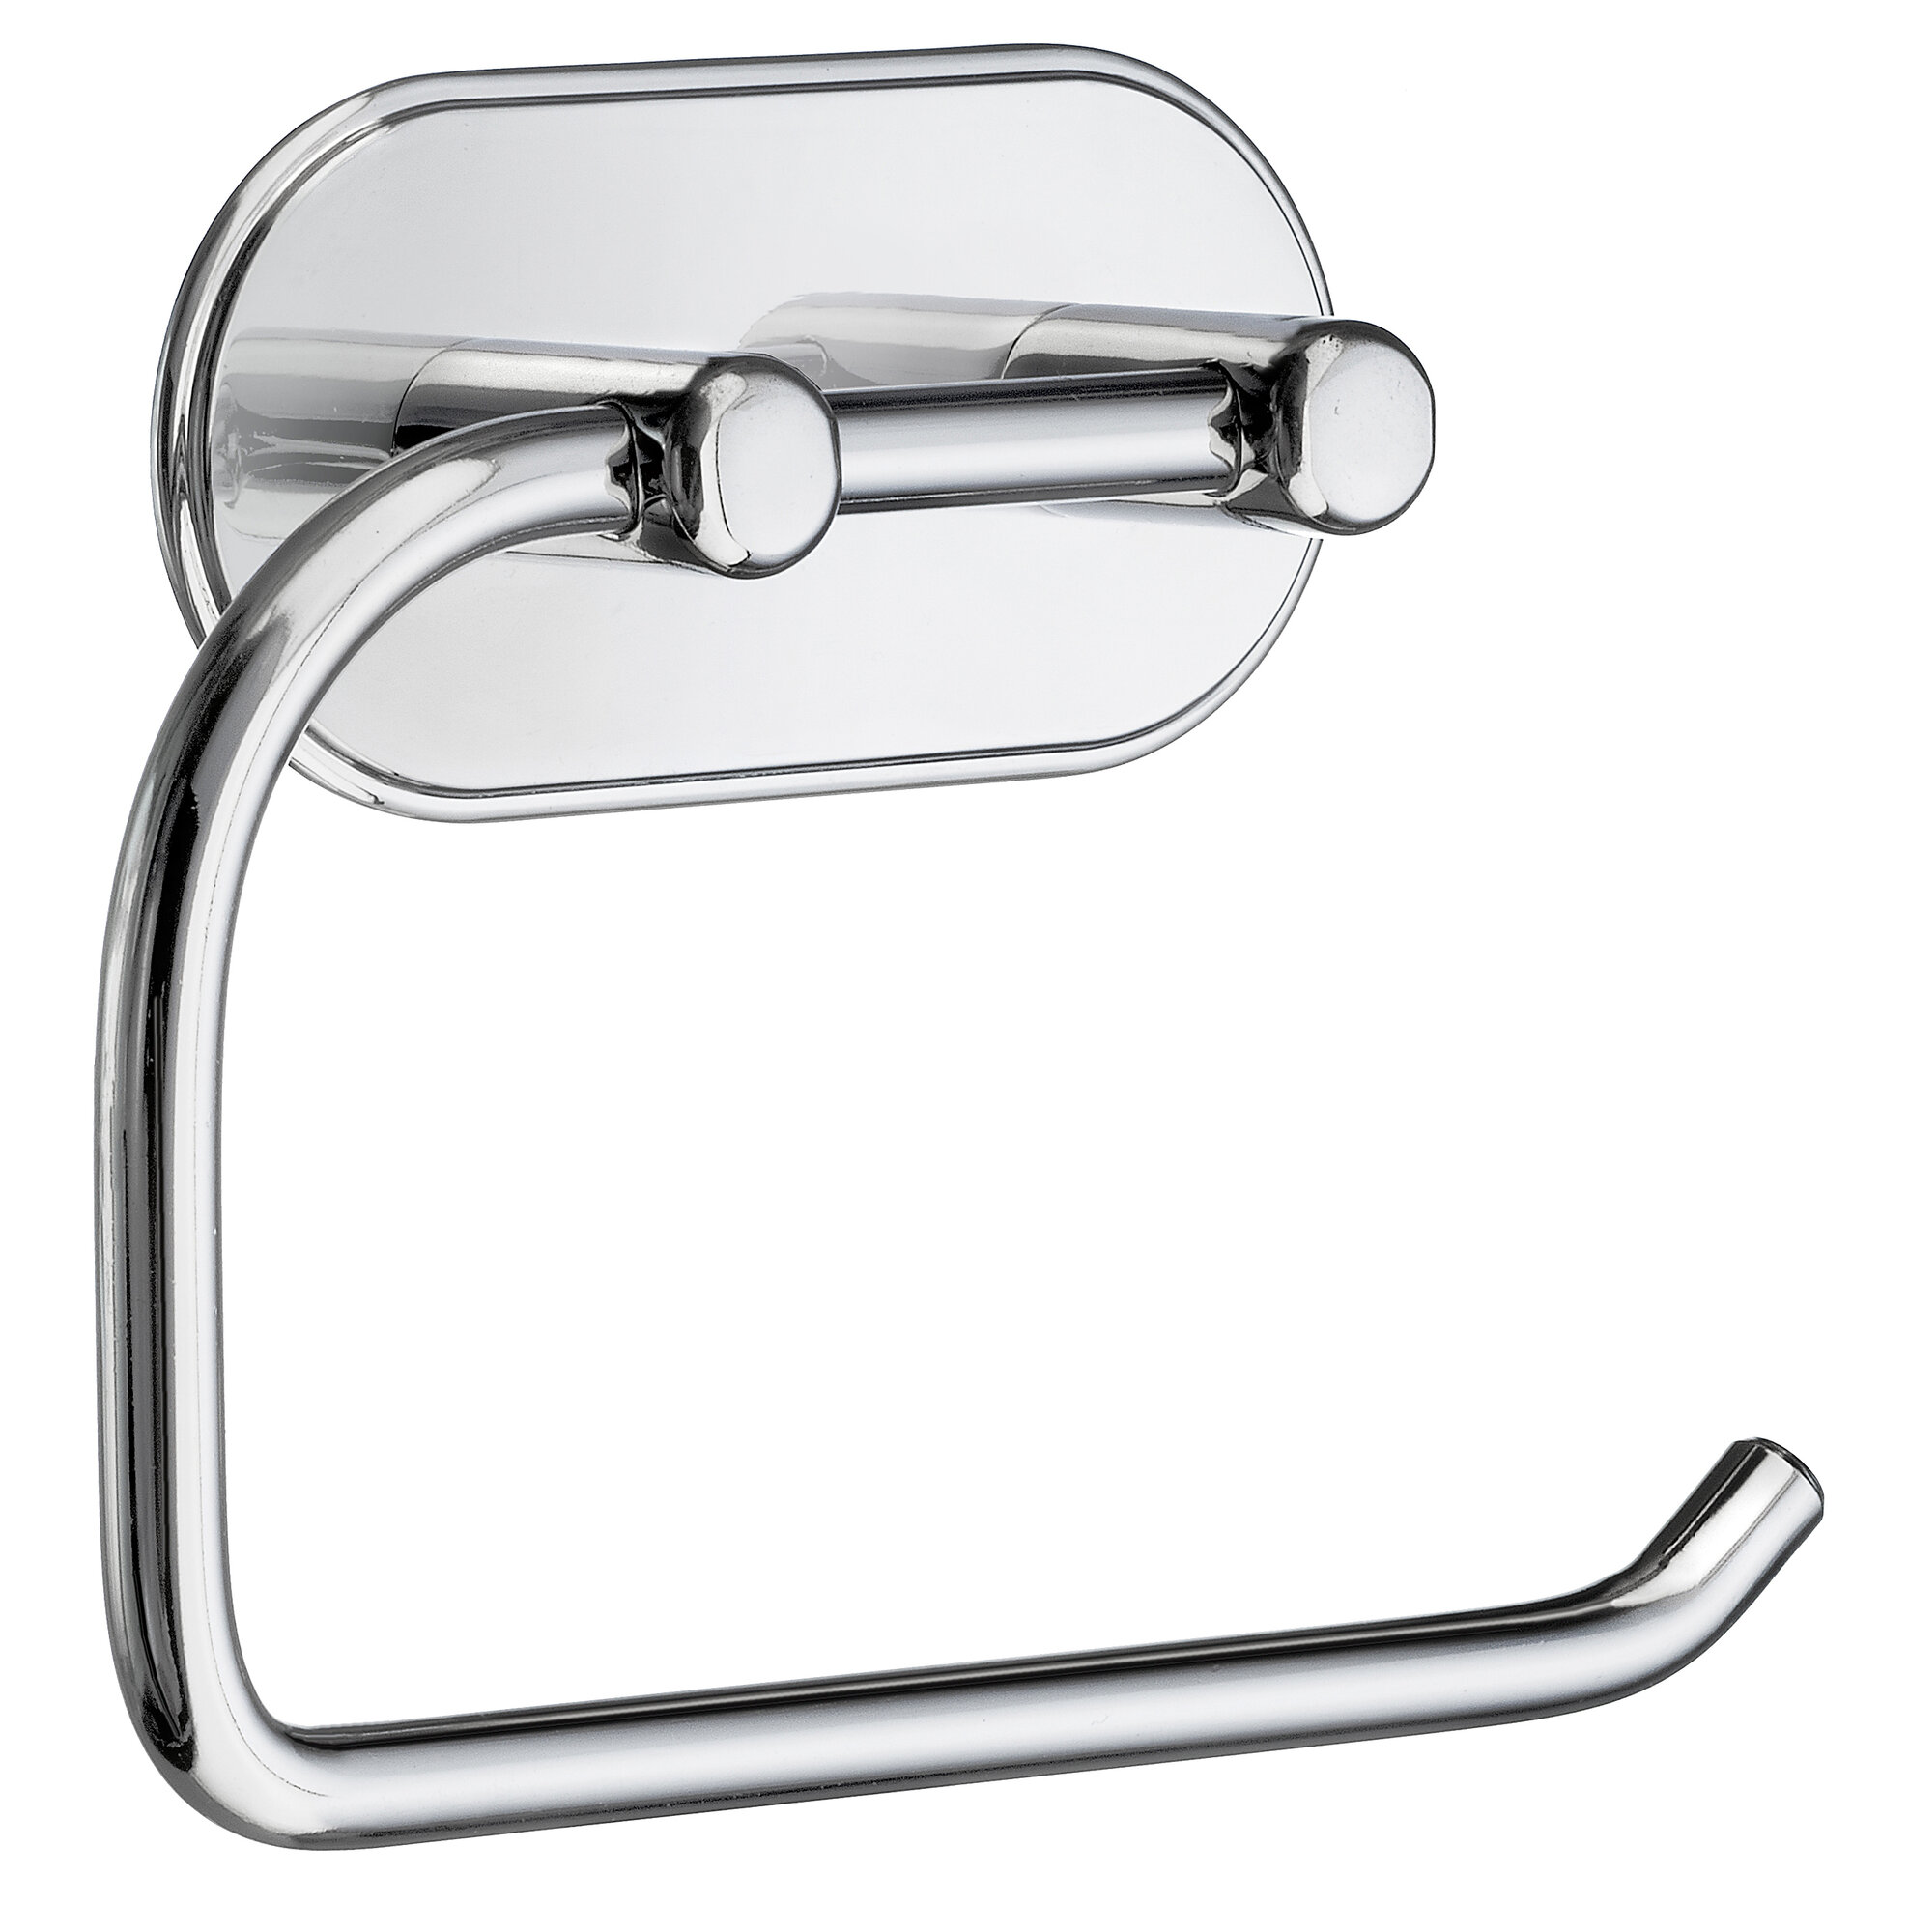 Smedbo Self-Adhesive Wall Mounted Toilet Paper Holder Chrome